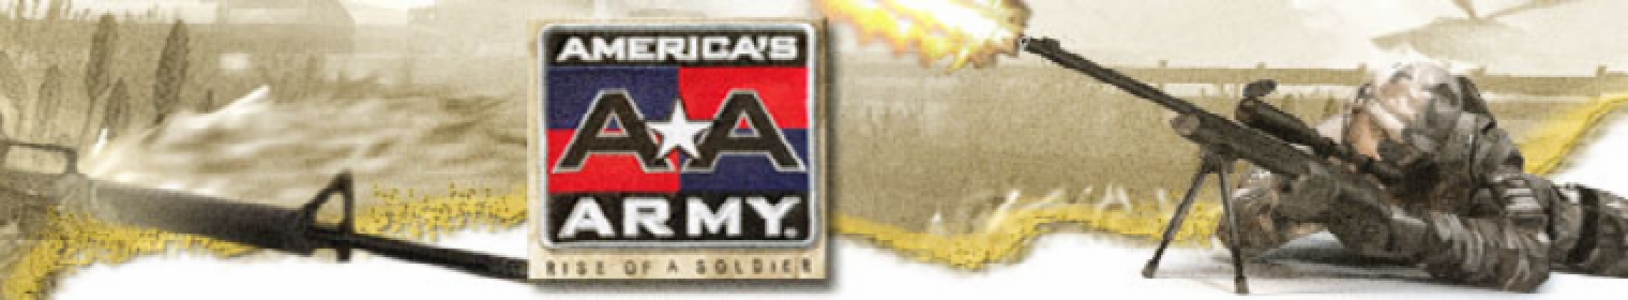 America's Army: Rise of a Soldier banner